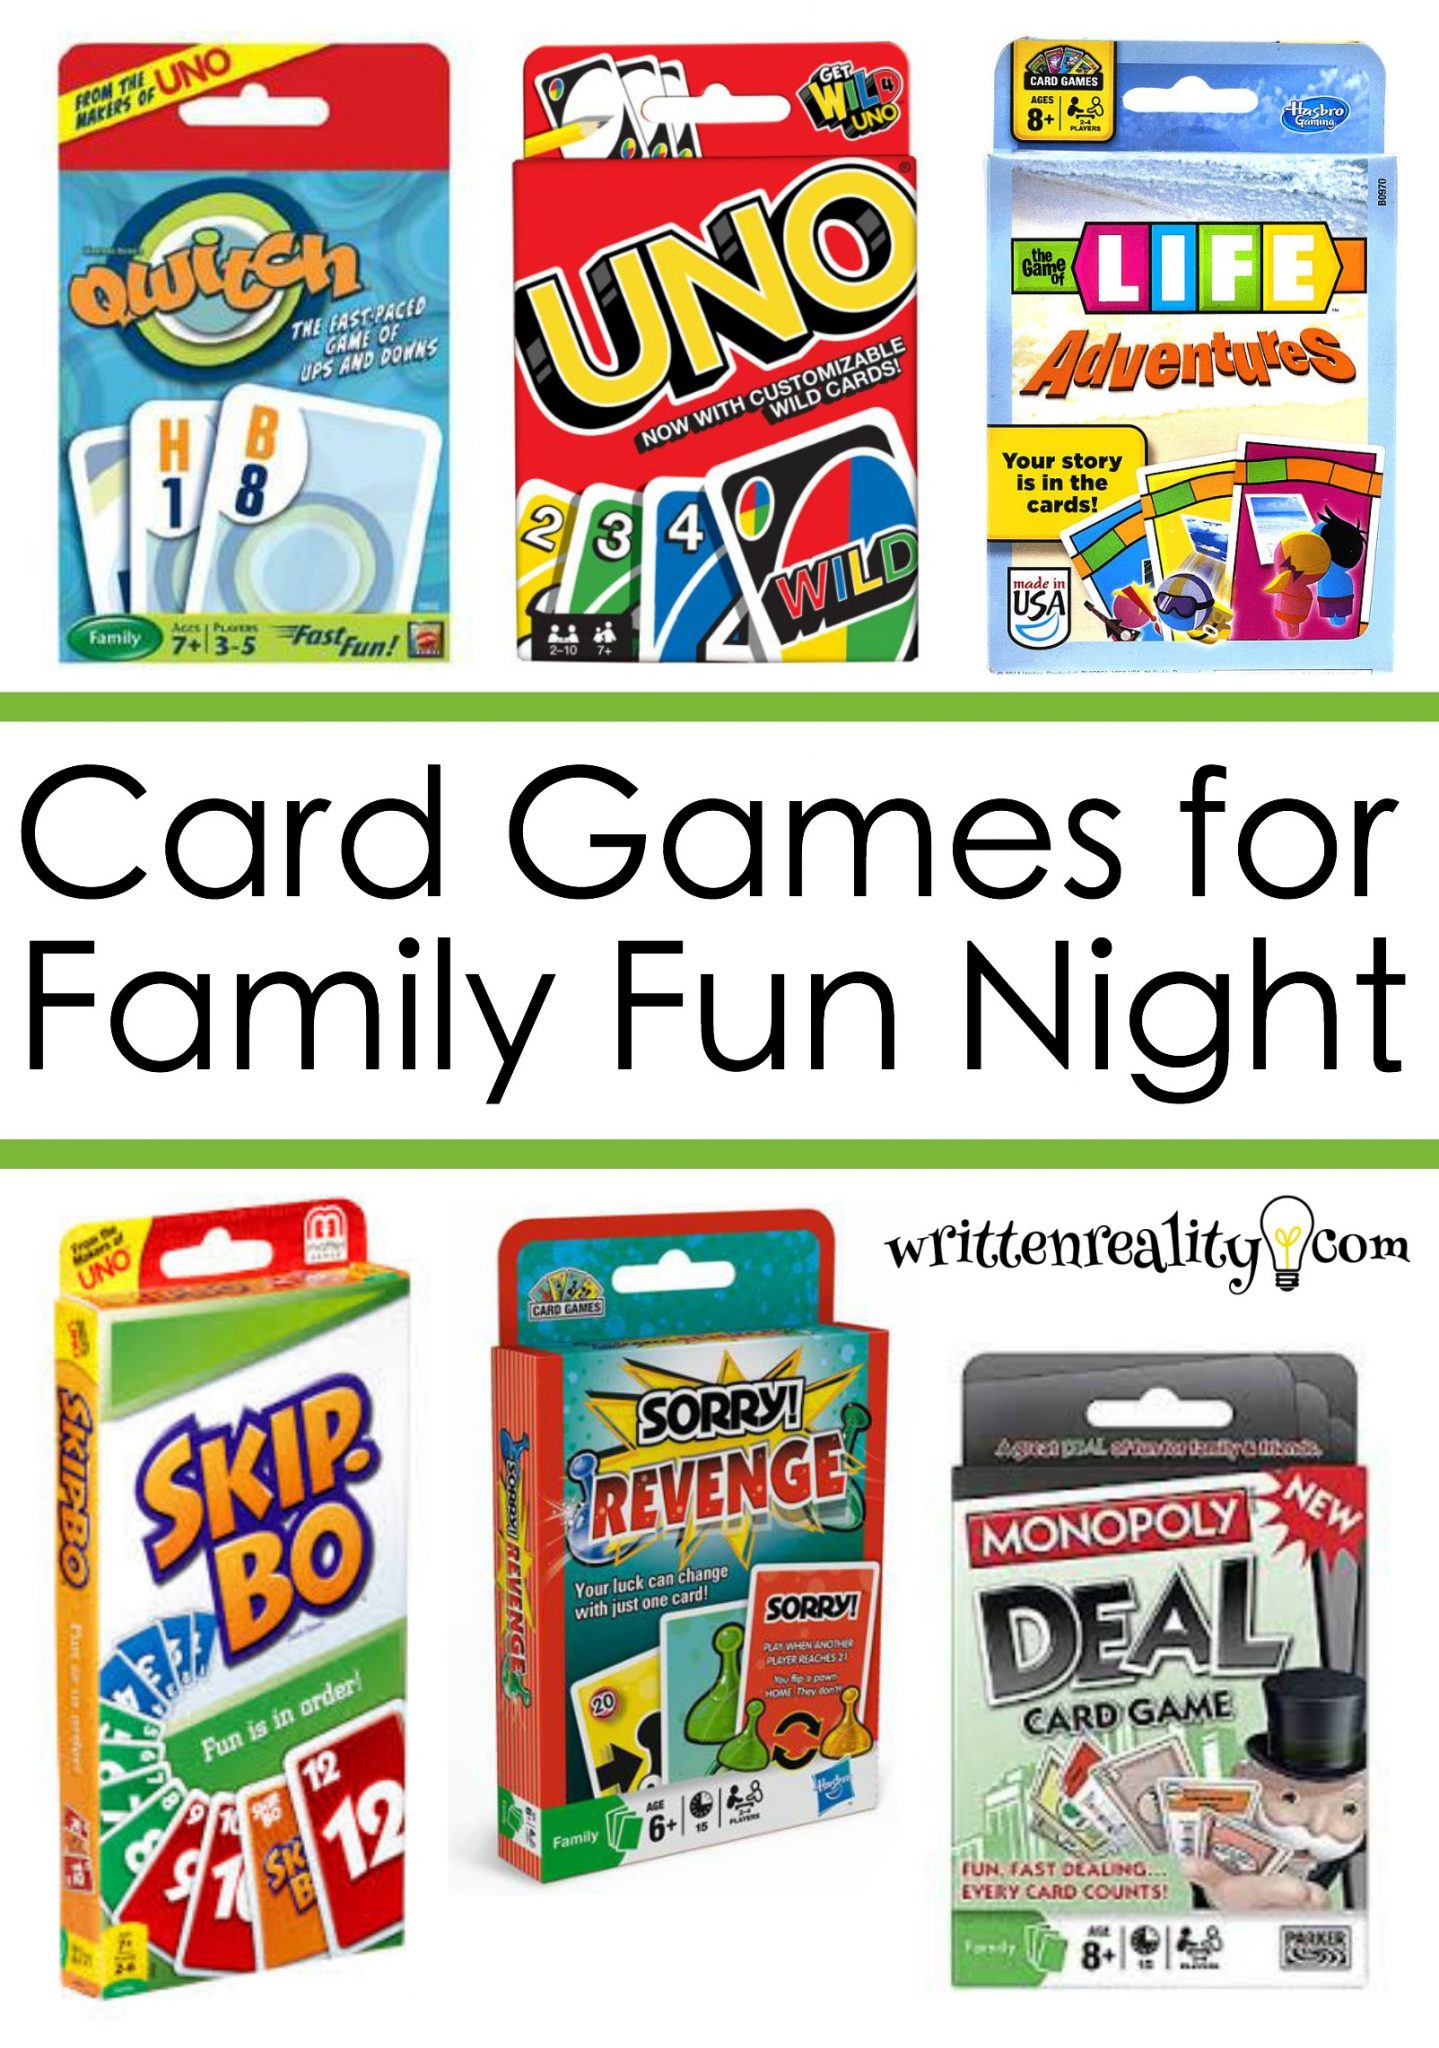 7 Best Card Games Kids Love To Play For Family Fun Night Written Reality